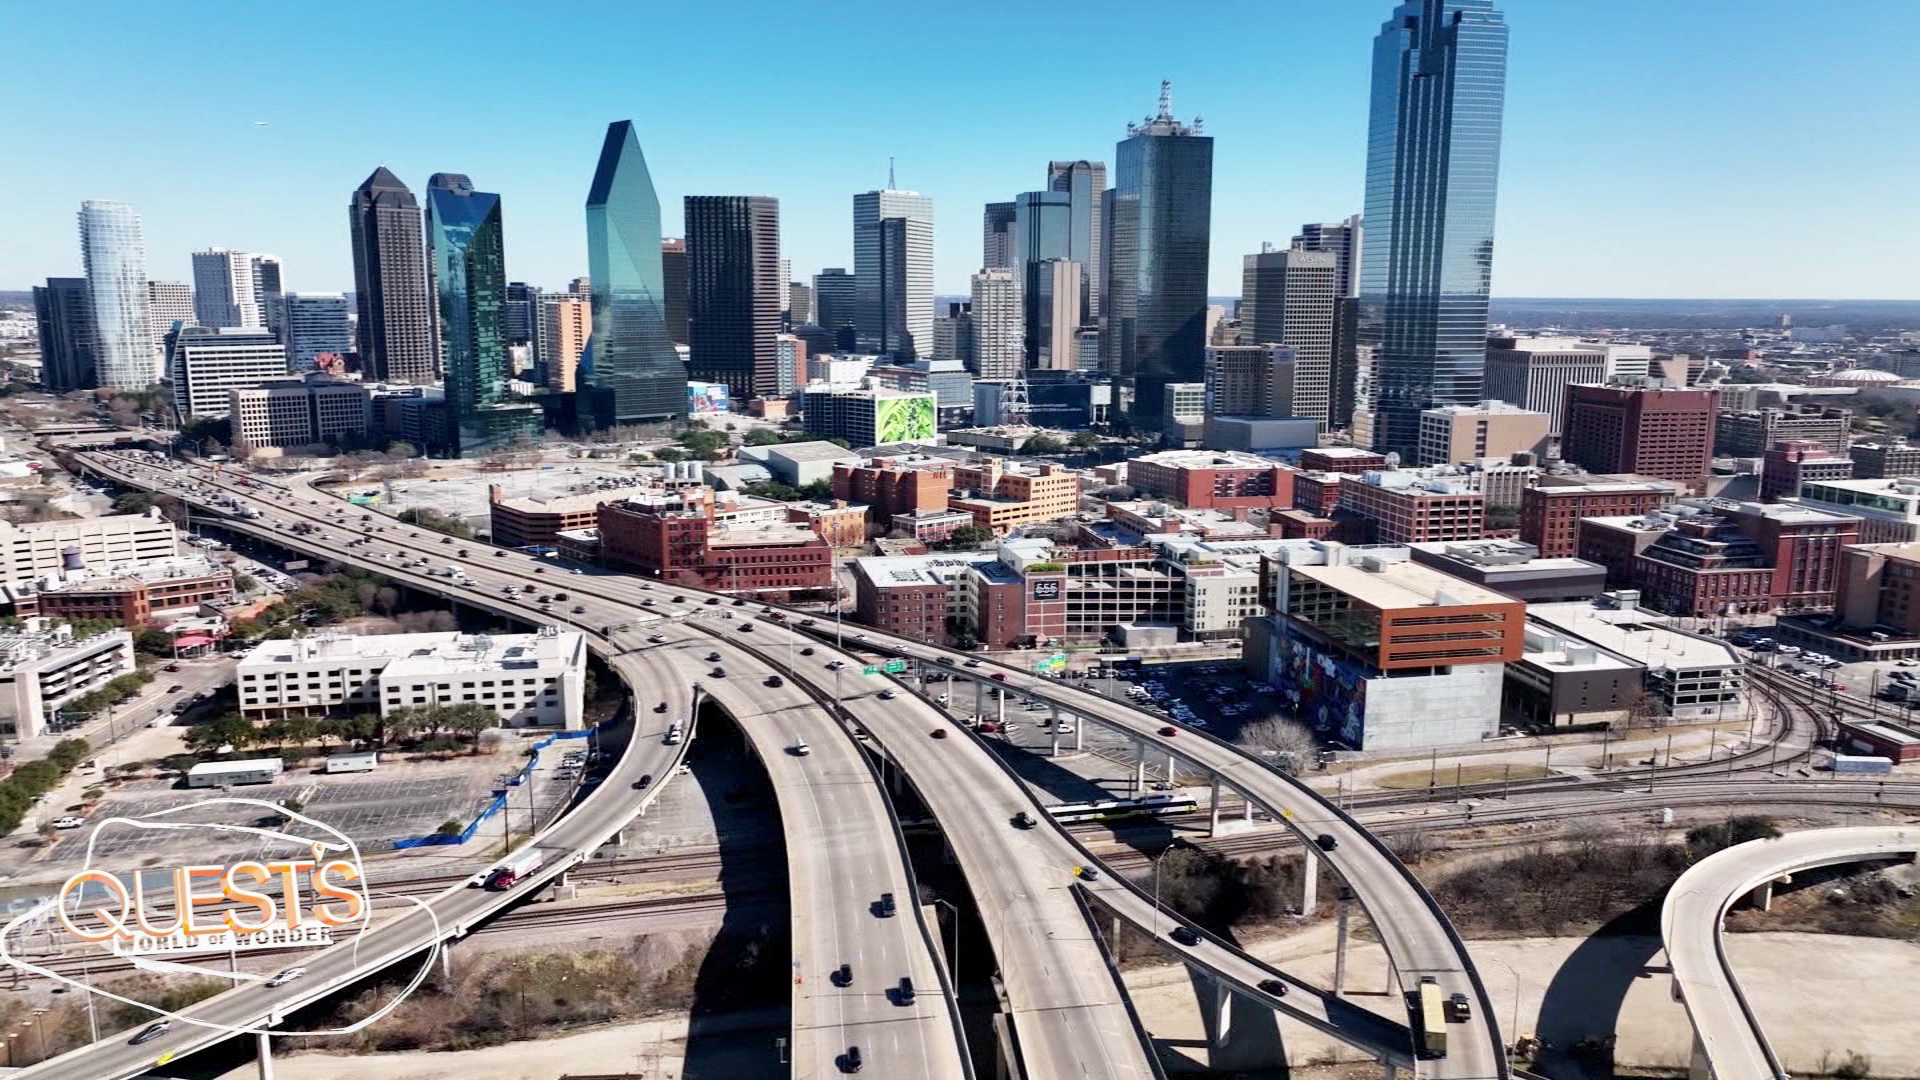 Dallas: The American city that's larger than life